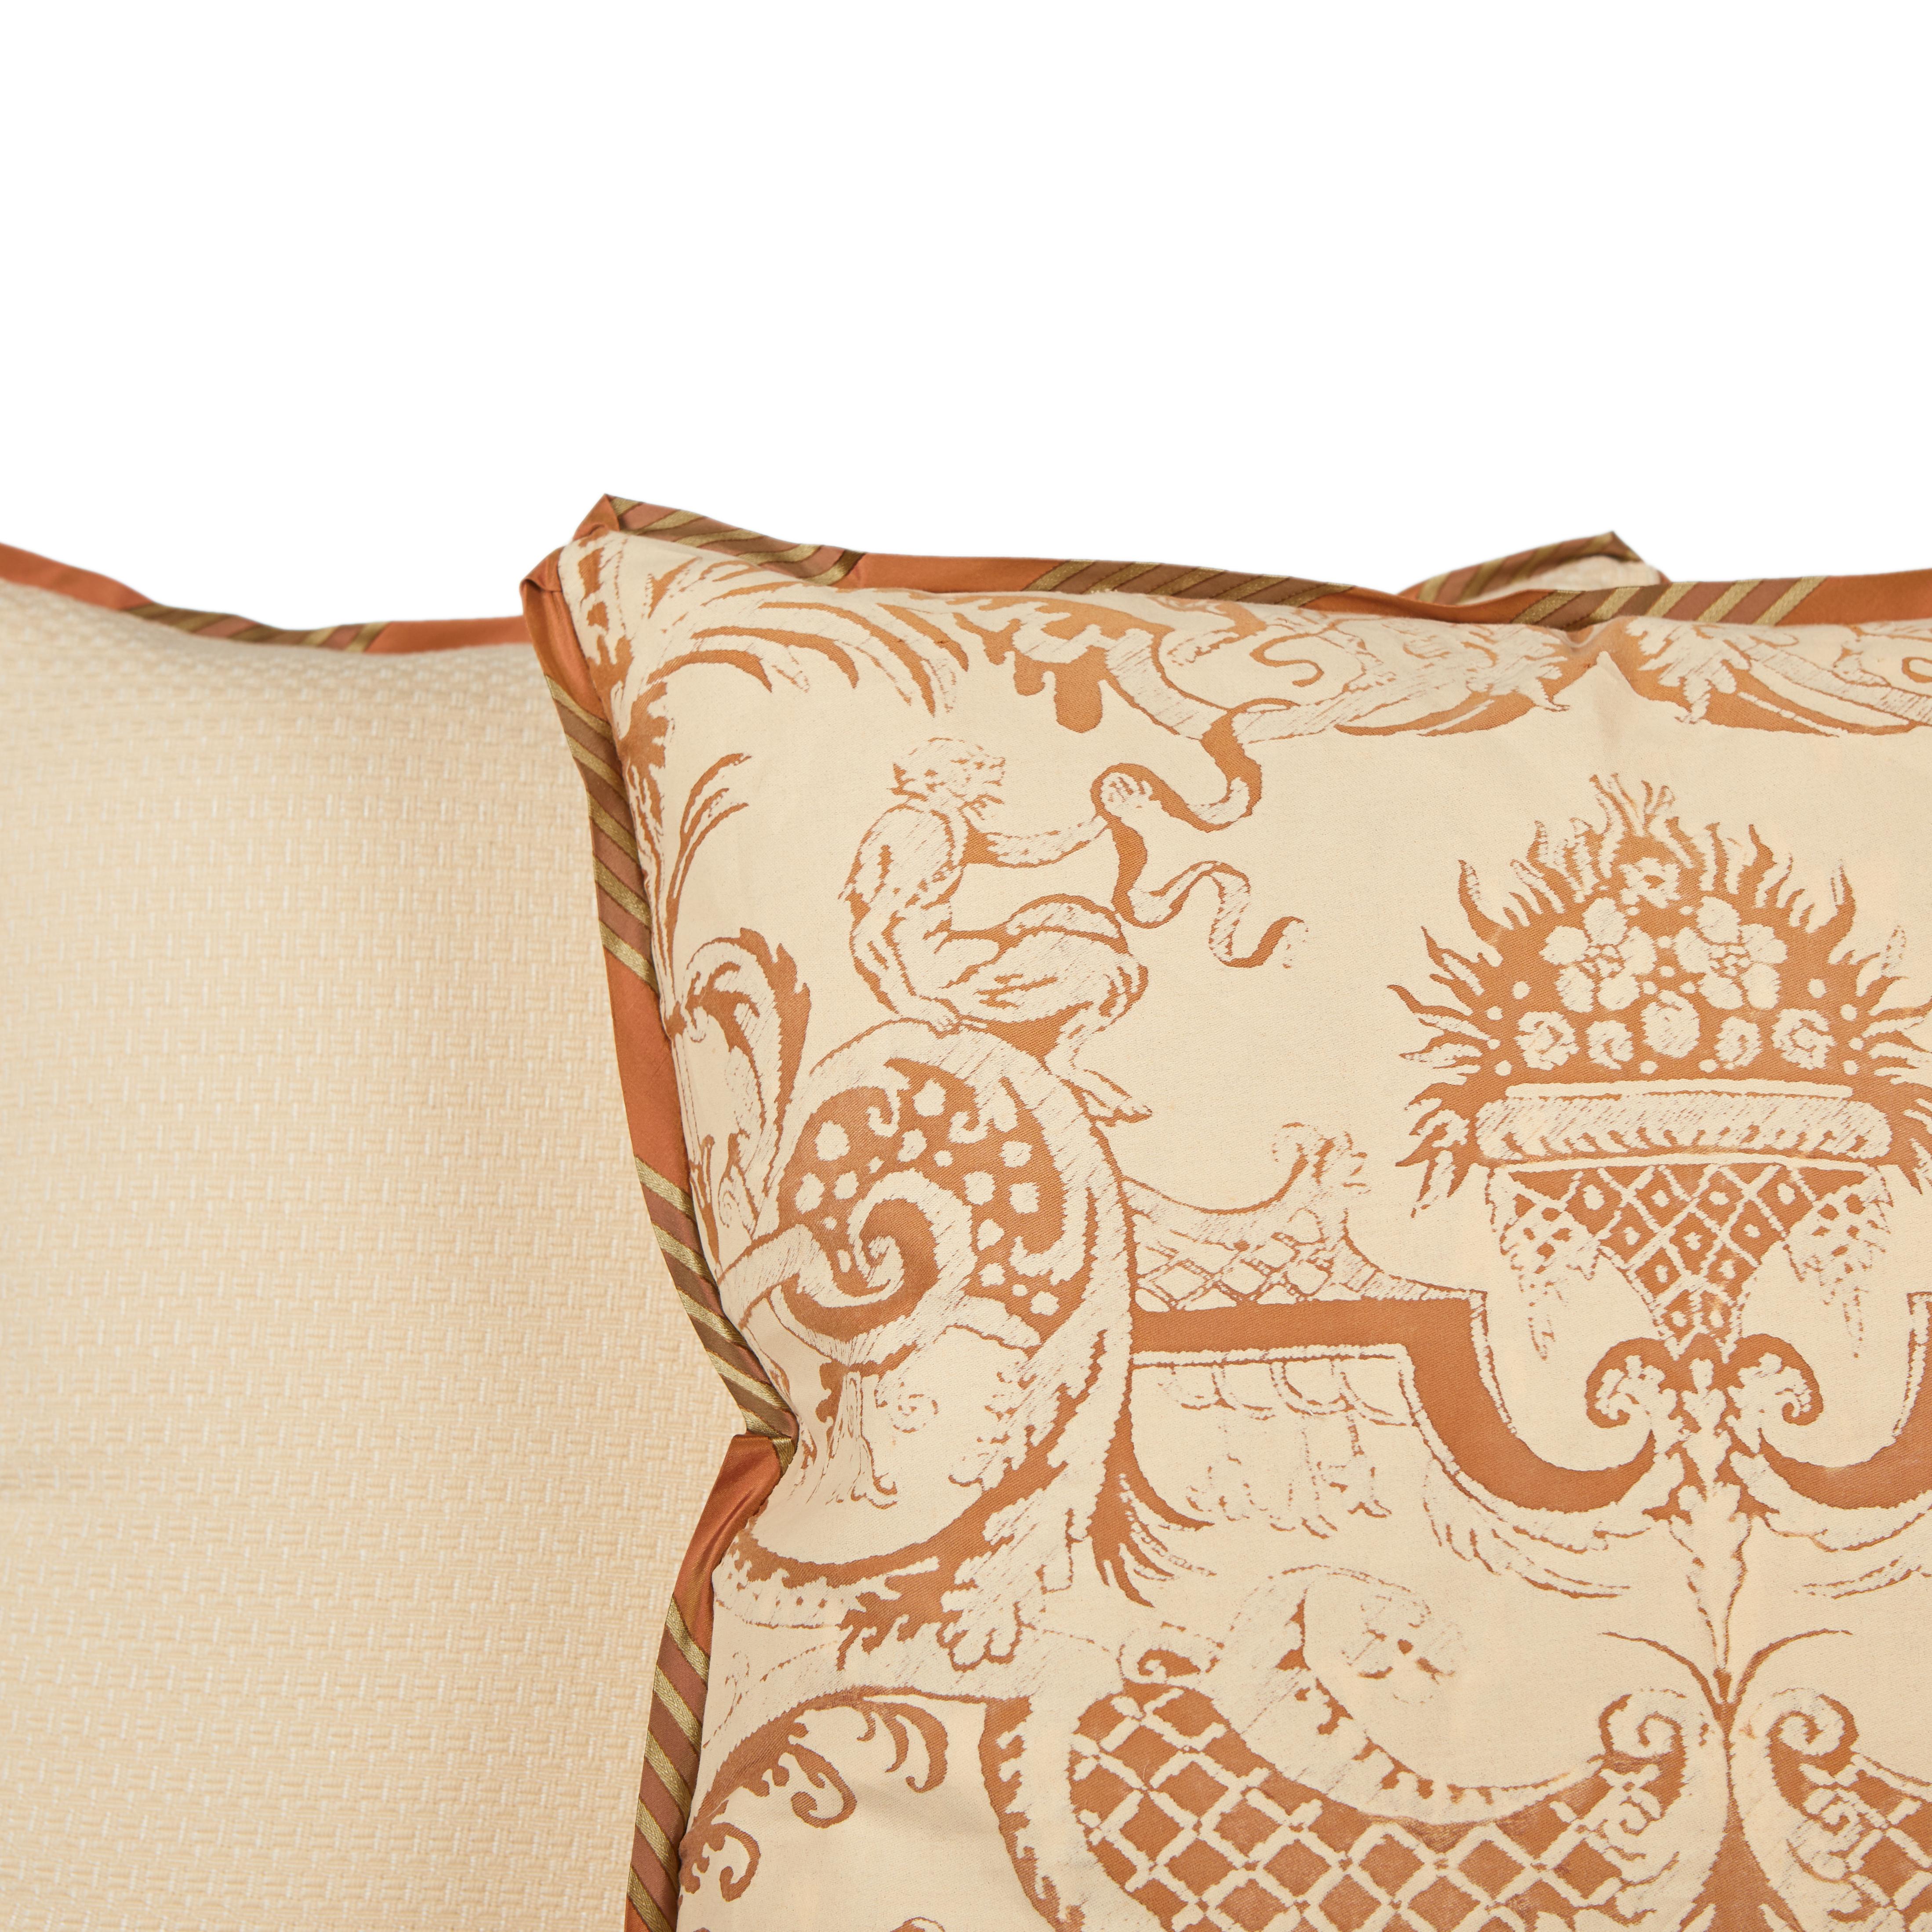 American Pair of Fortuny Fabric Cushions in the Mazzarino Print in Tan and Rust For Sale